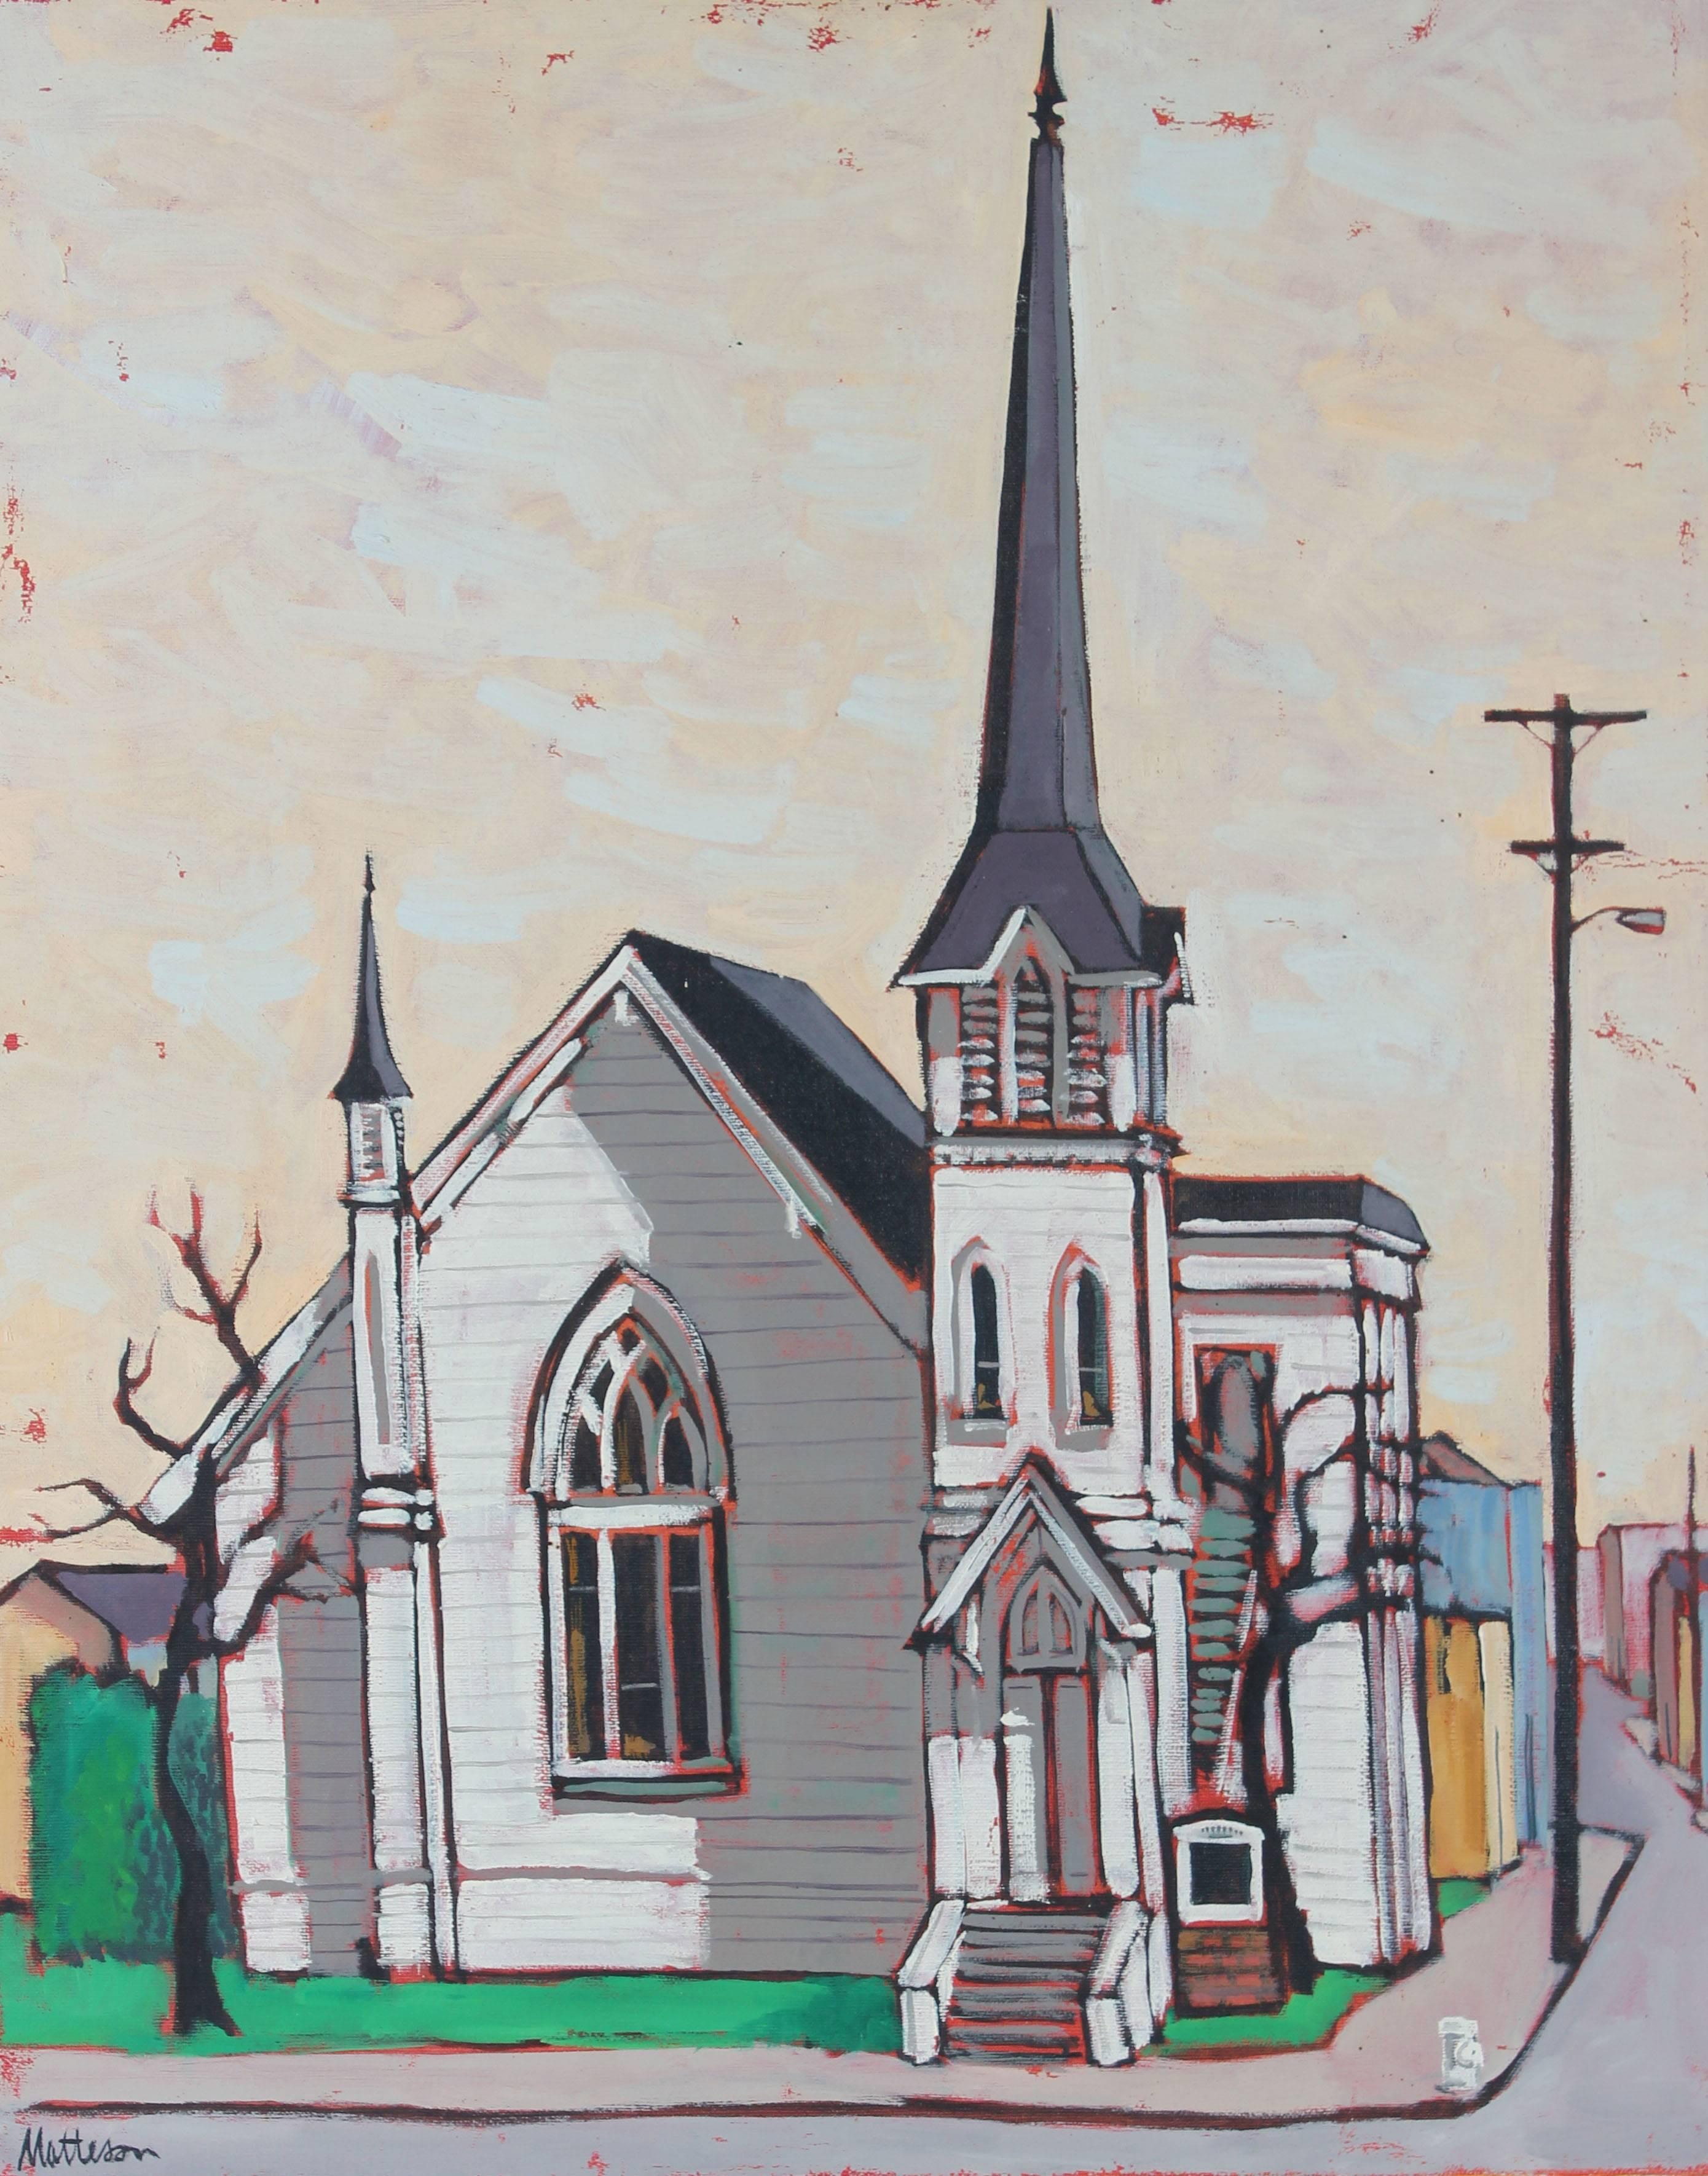 Rip Matteson Landscape Painting - "Berkeley" Cityscape with Church, Oil on Canvas, 1964